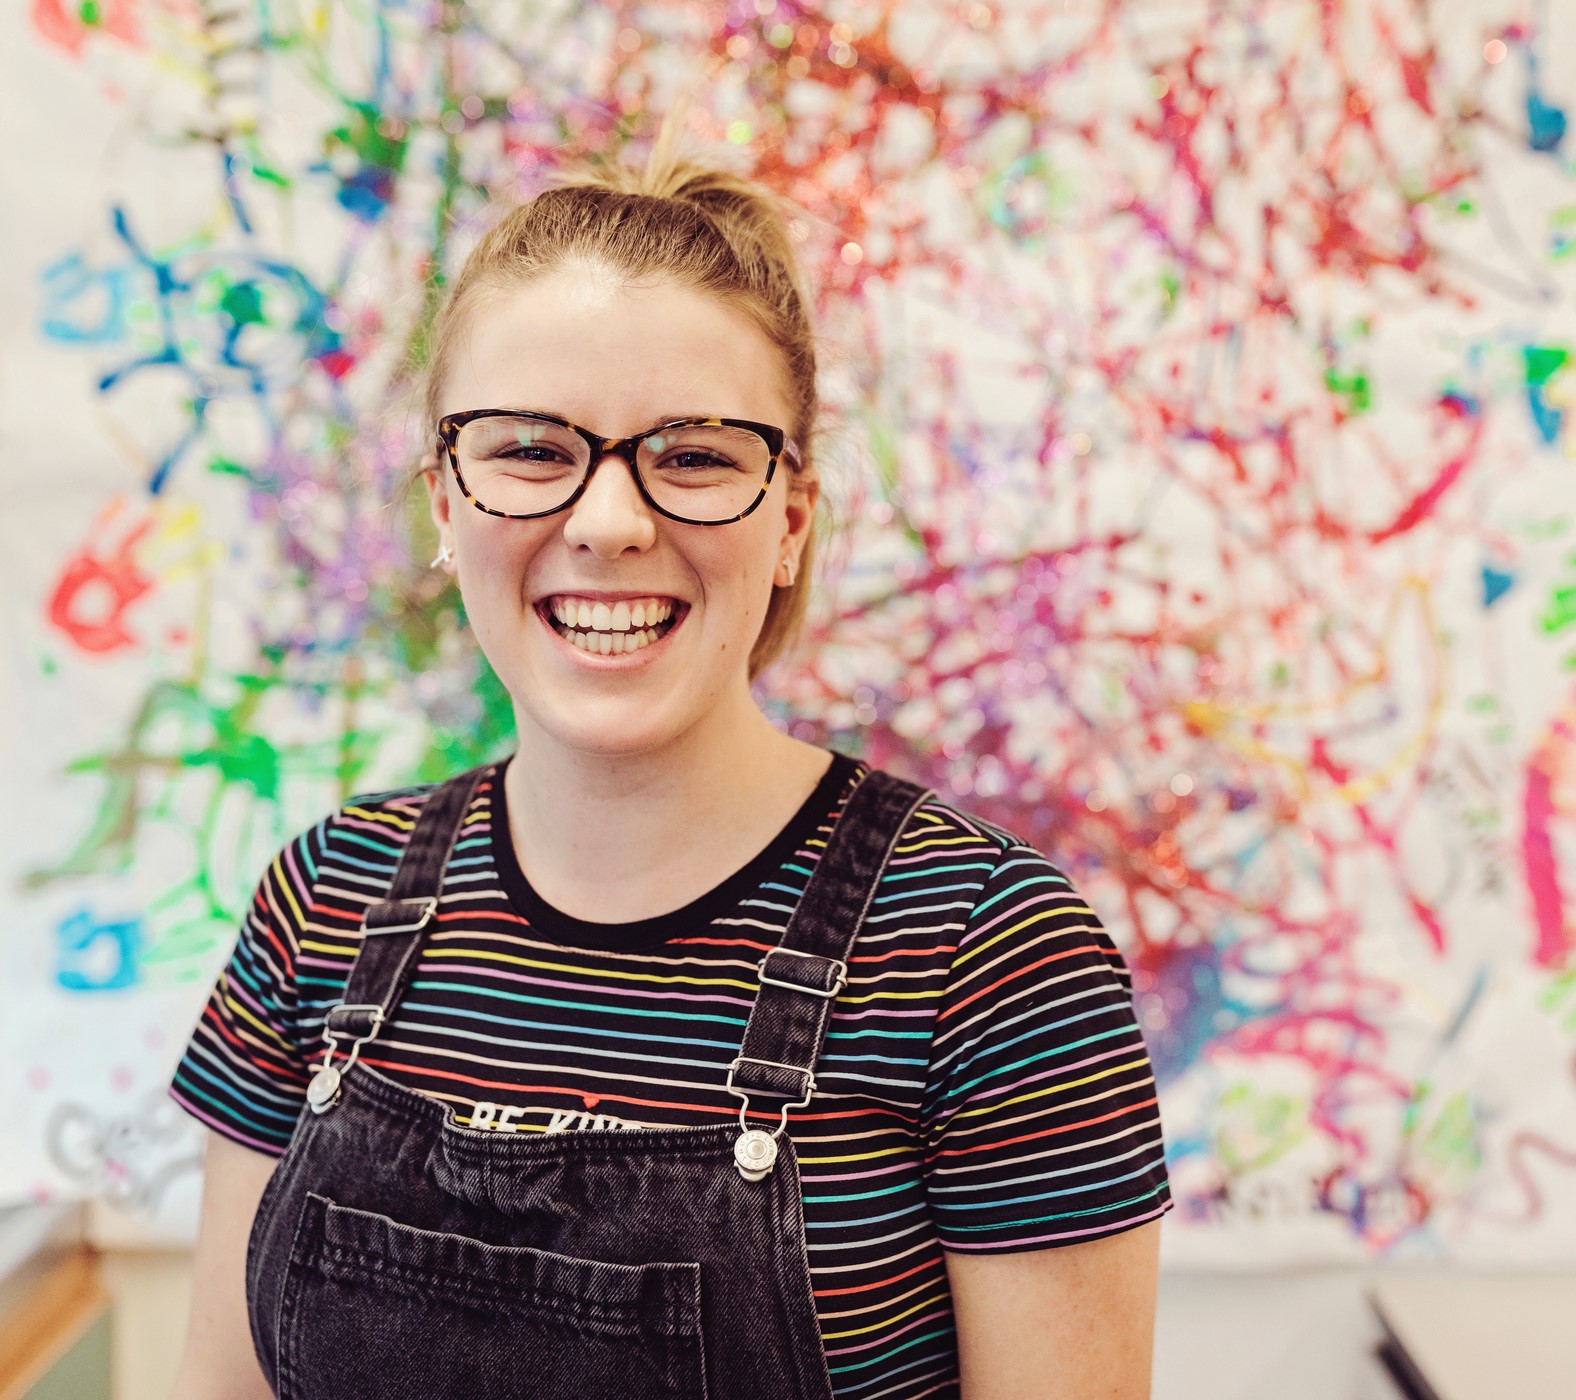 A student stands in front of a wall splattered with paint.